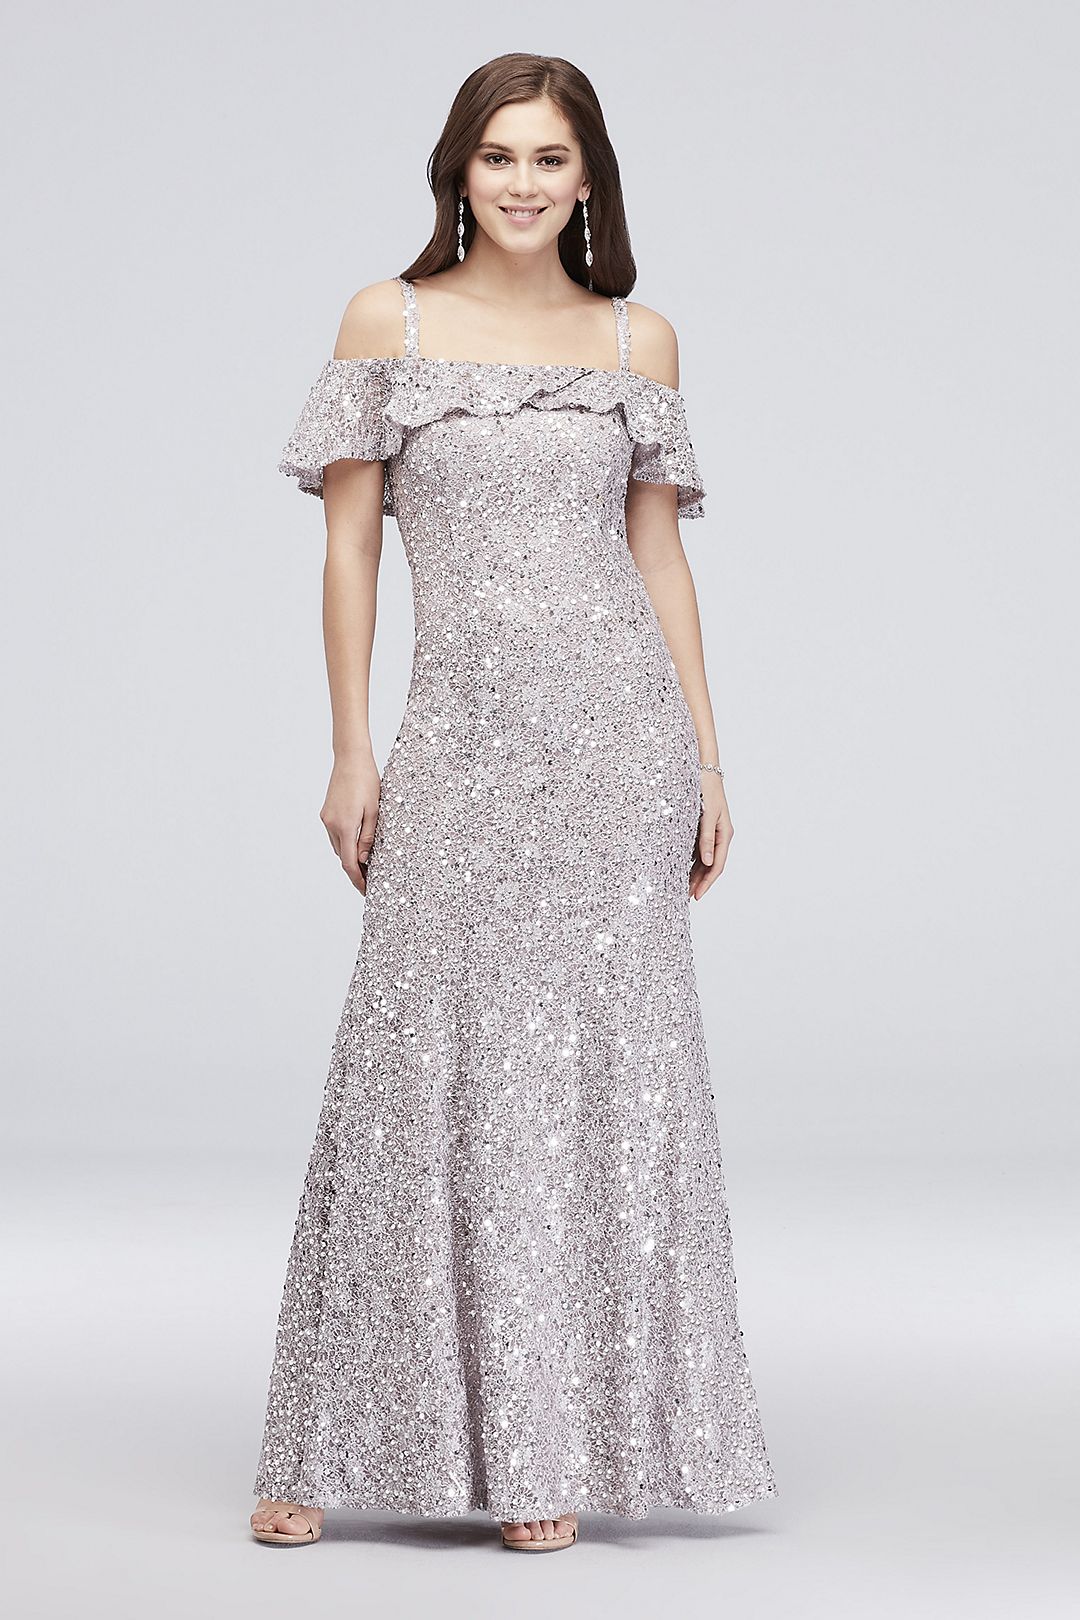 Sequin Cold-Shoulder Mermaid Dress with Flounce Image